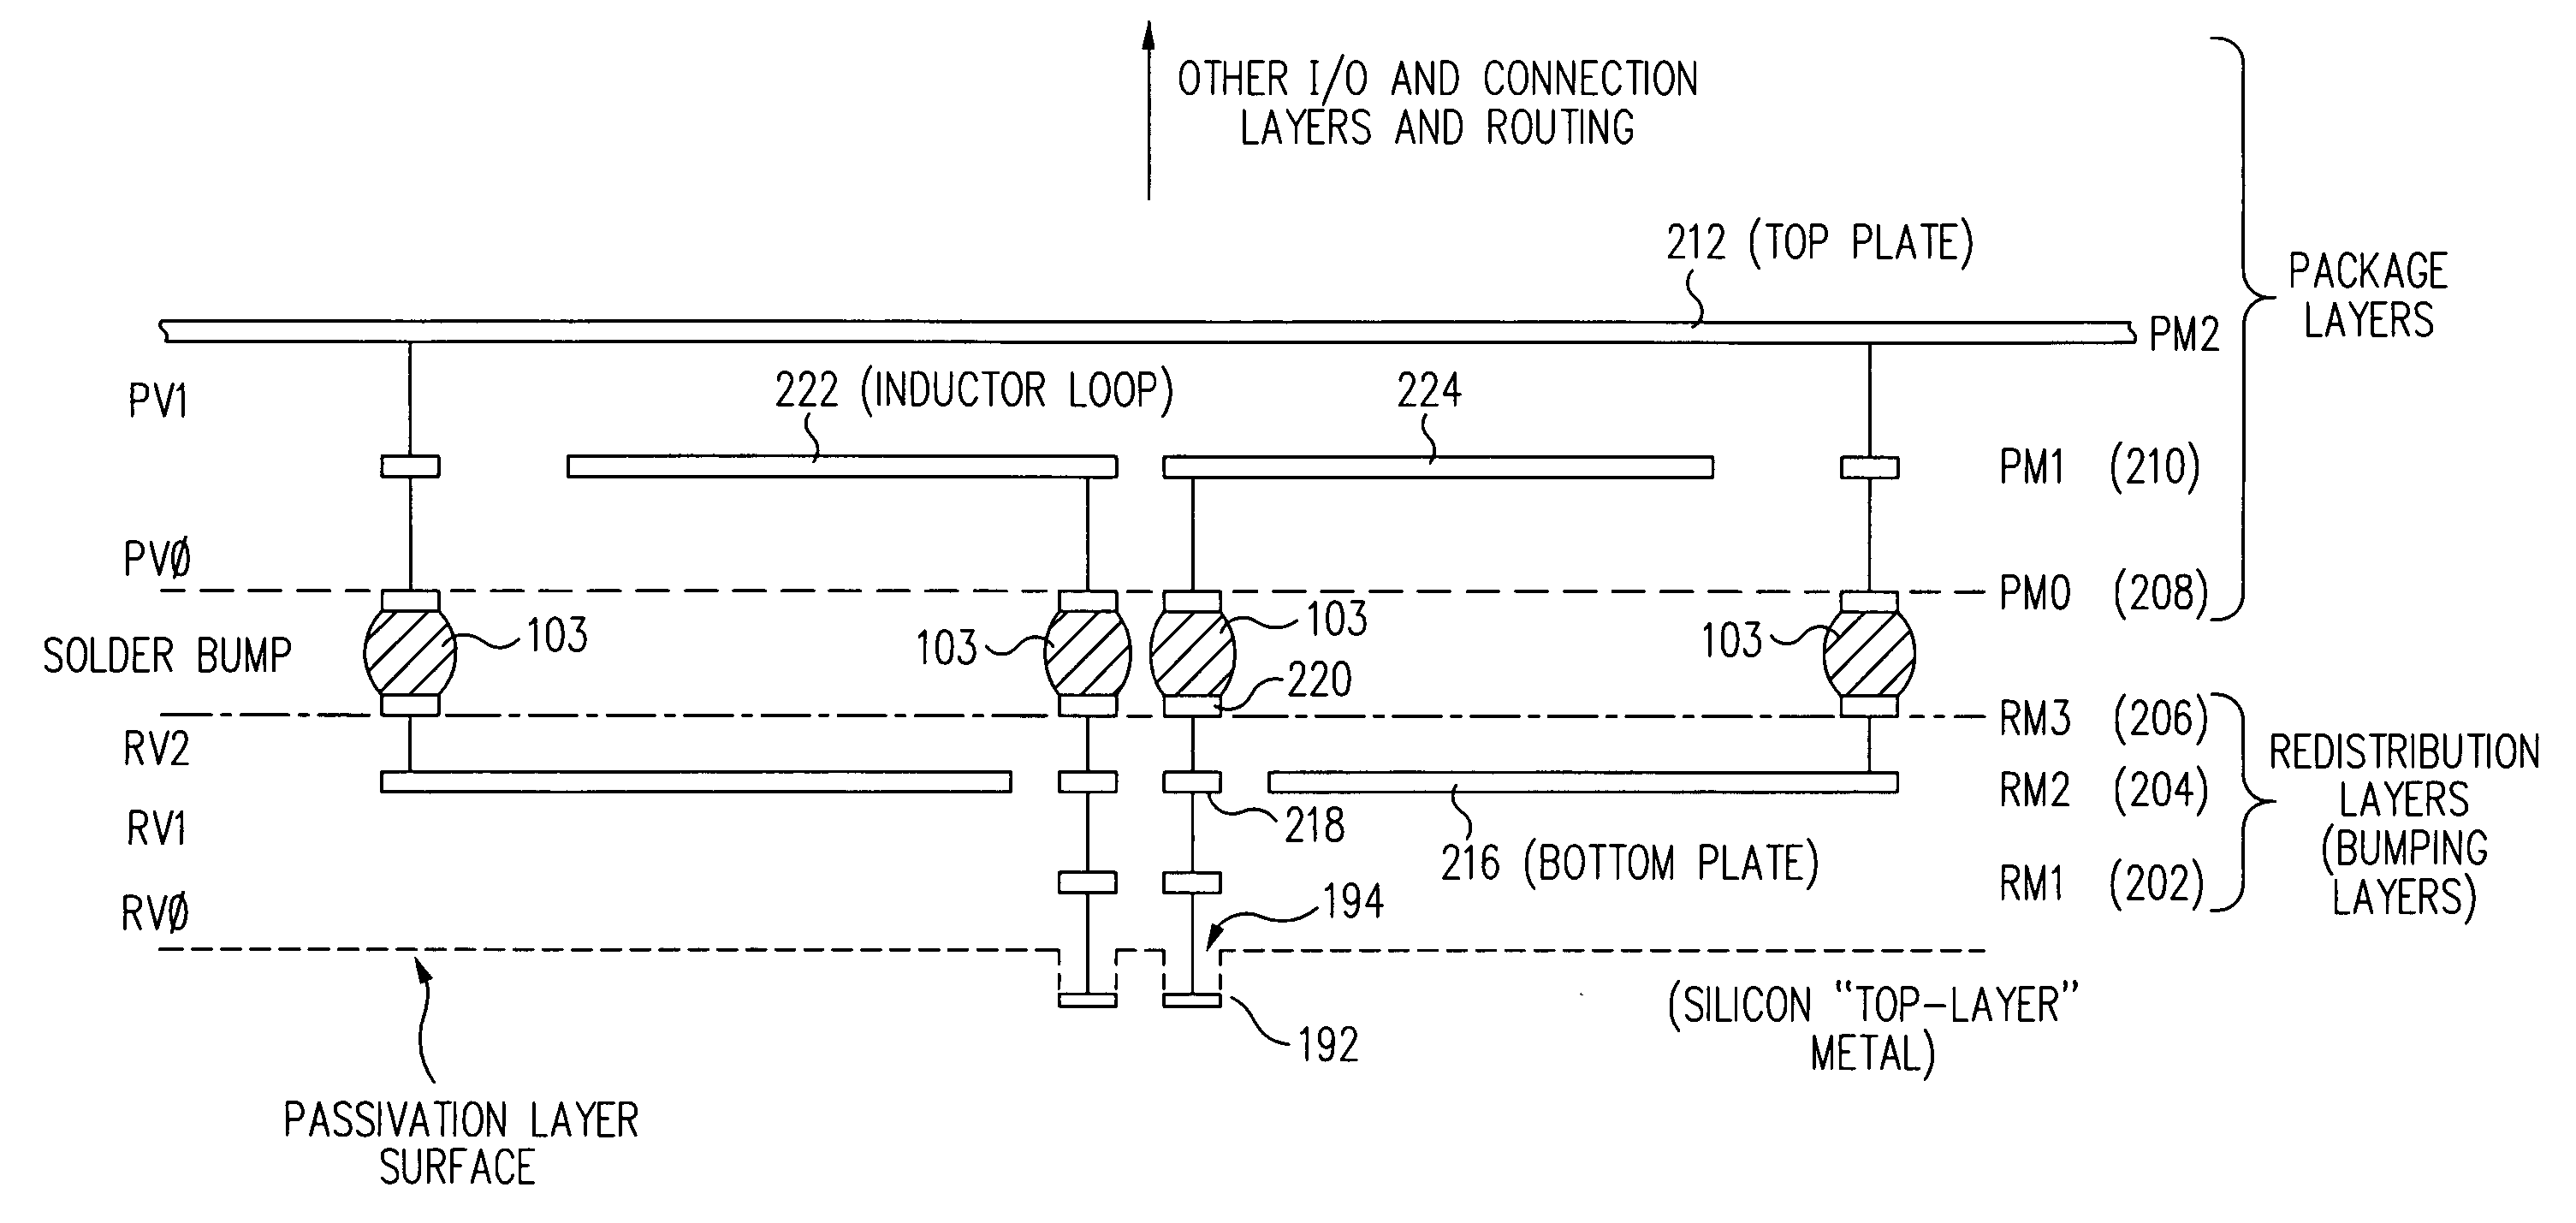 Integrated circuit package configuration incorporating shielded circuit element structure